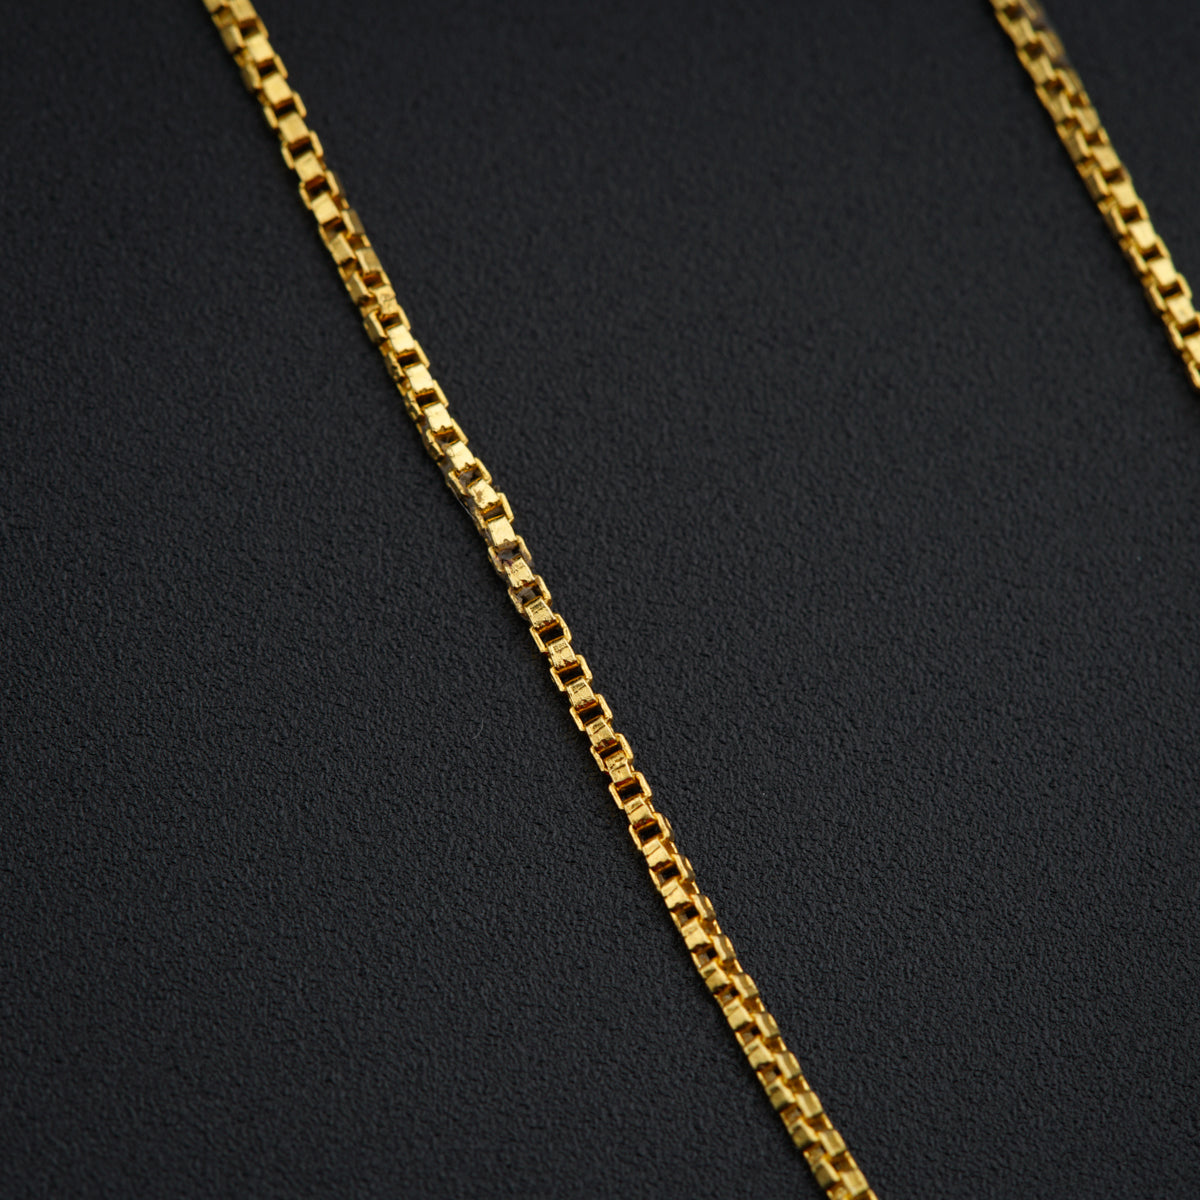 a close up of a gold chain on a black surface